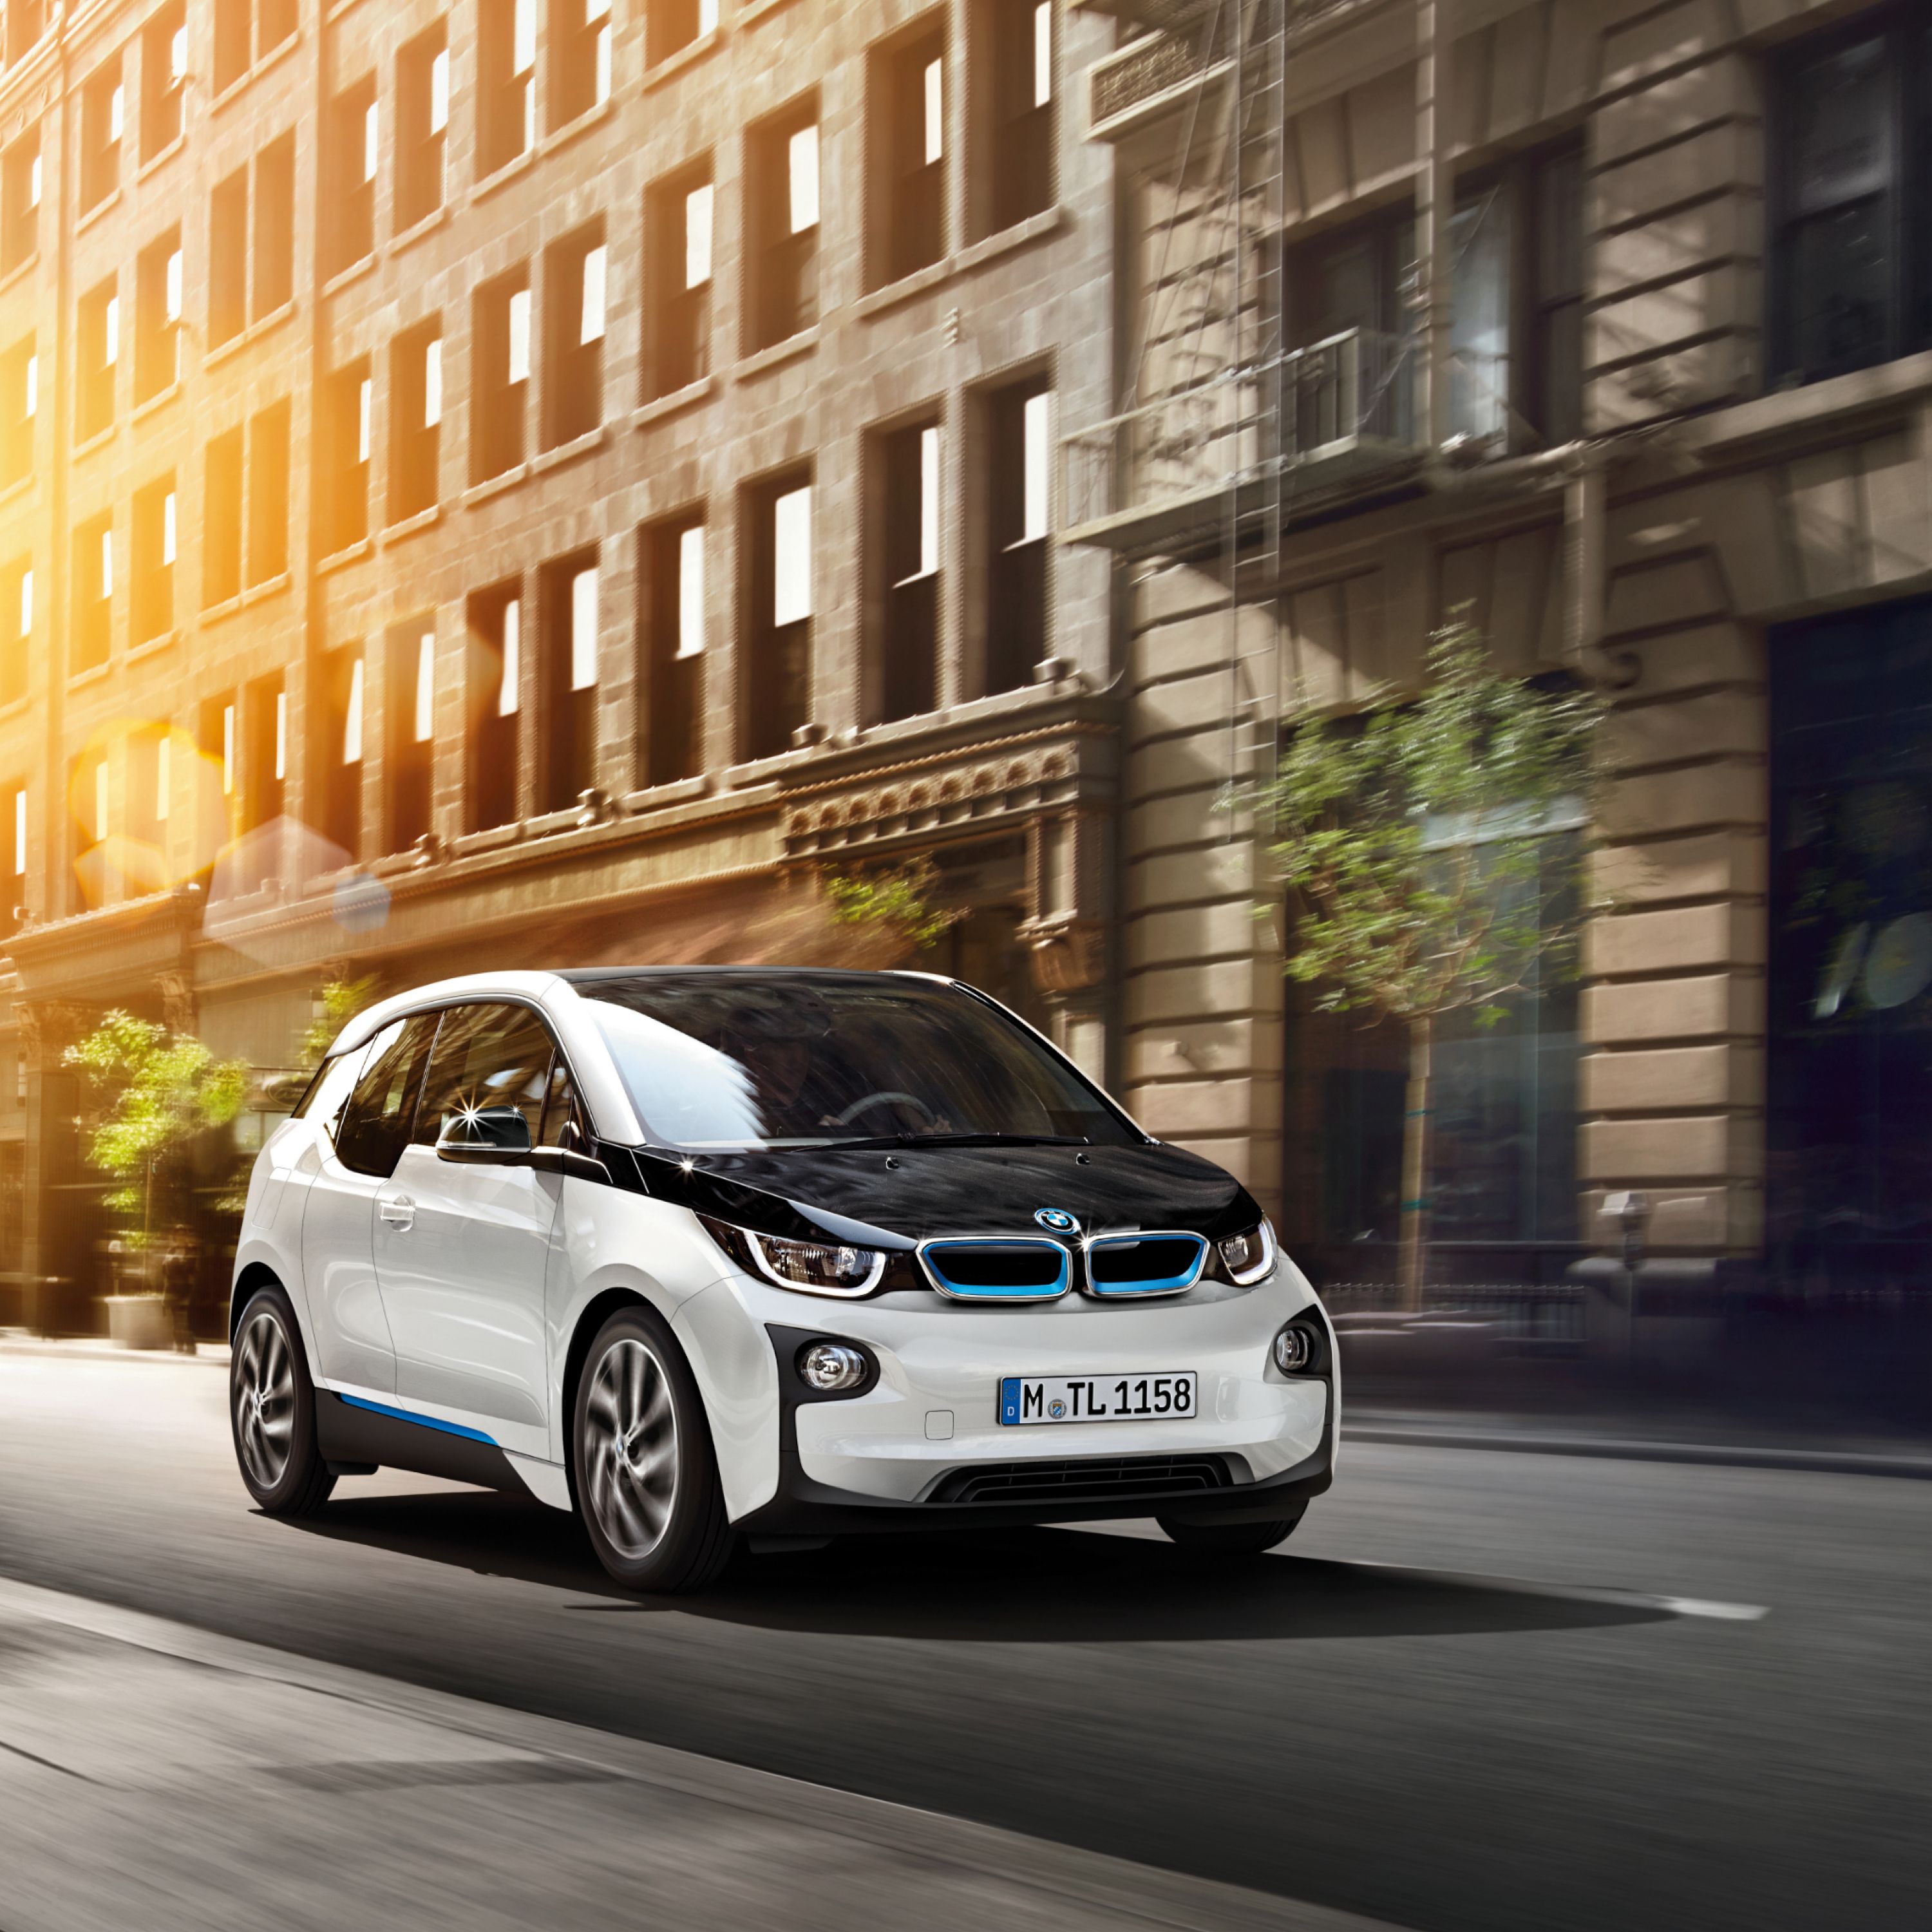 White BMW i3 electric small car driving in front of Roman architecture